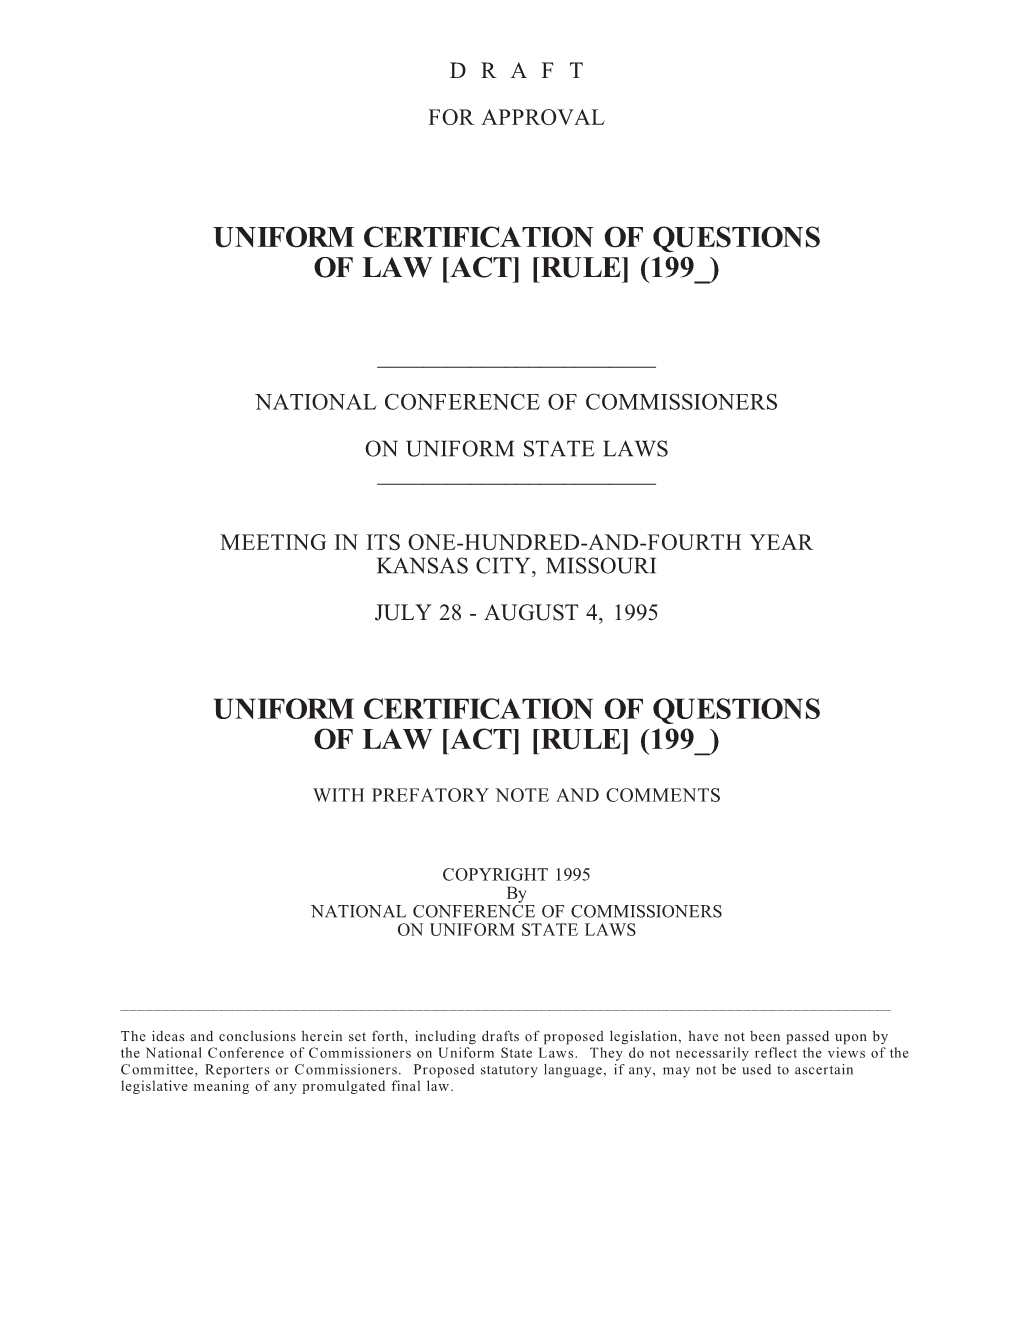 Uniform Certification of Questions of Law [Act] [Rule] (199 )